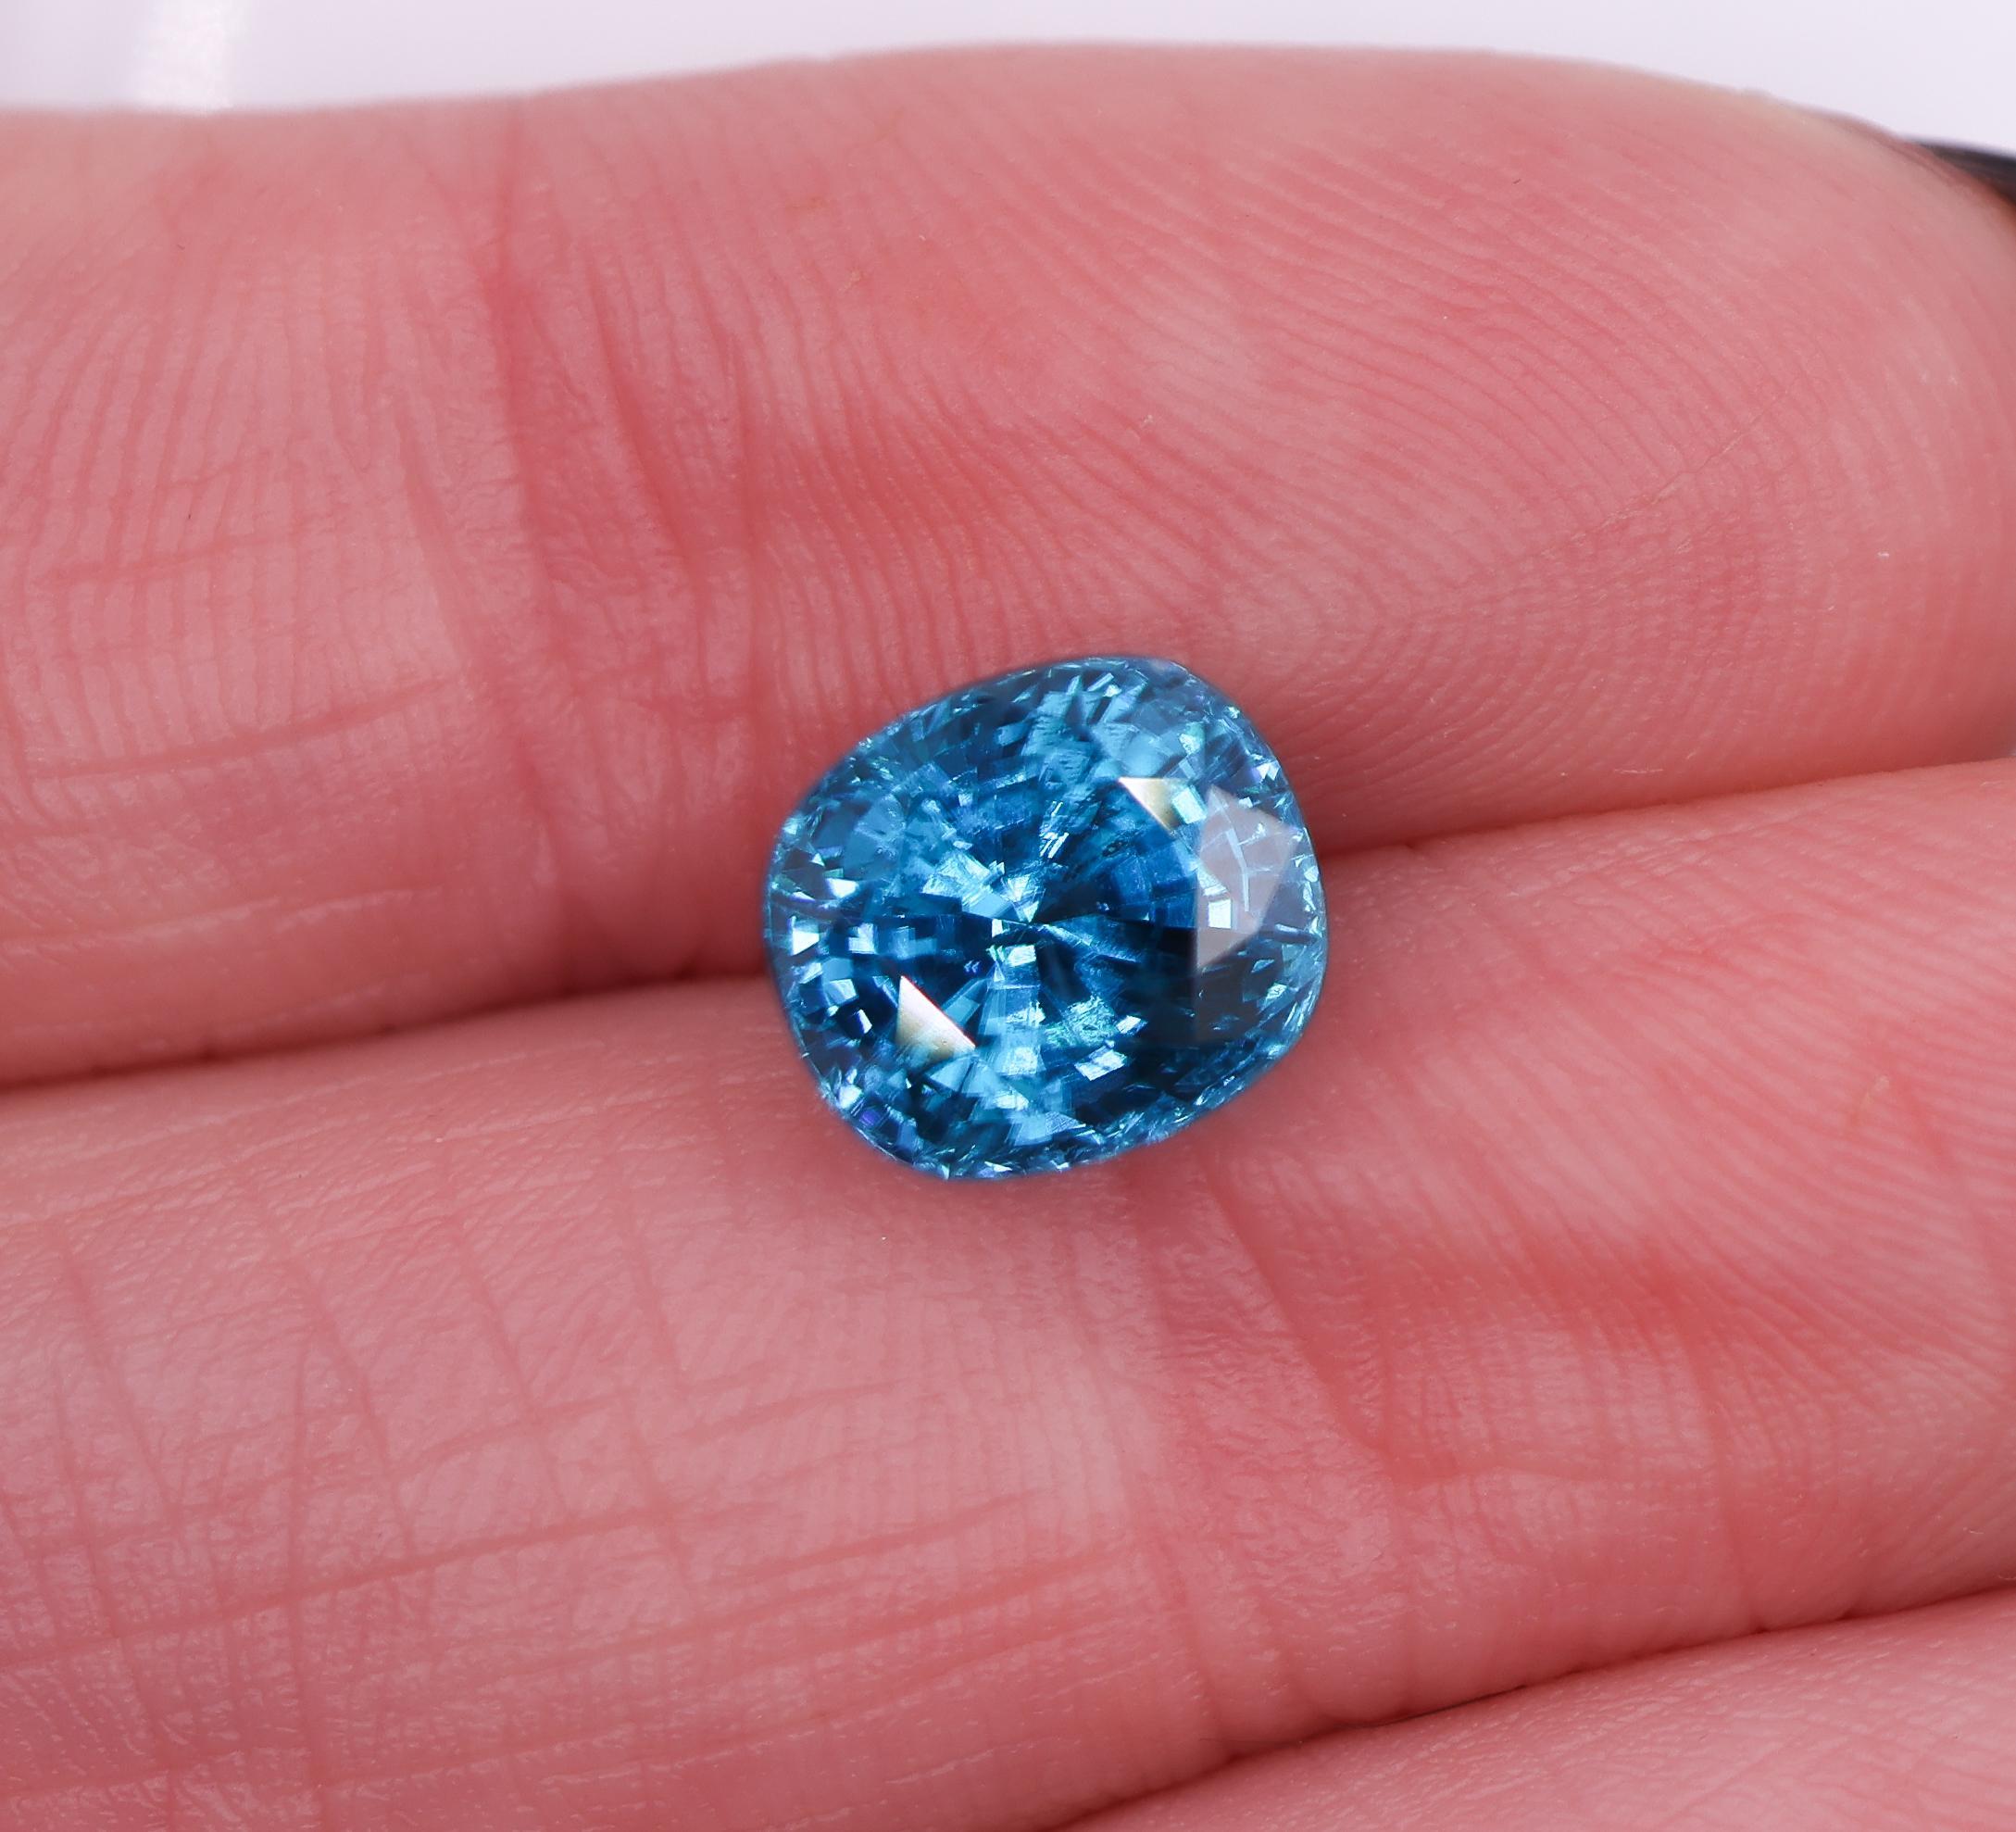 A gorgeous cushion shape blue zircon looking for it's next home. If you feel a sparkle of excitement seeing this gem and want to design a one of a kind piece of jewelry, let us know!

Cambodian Zircon is the perfect eco-friendly alternative to